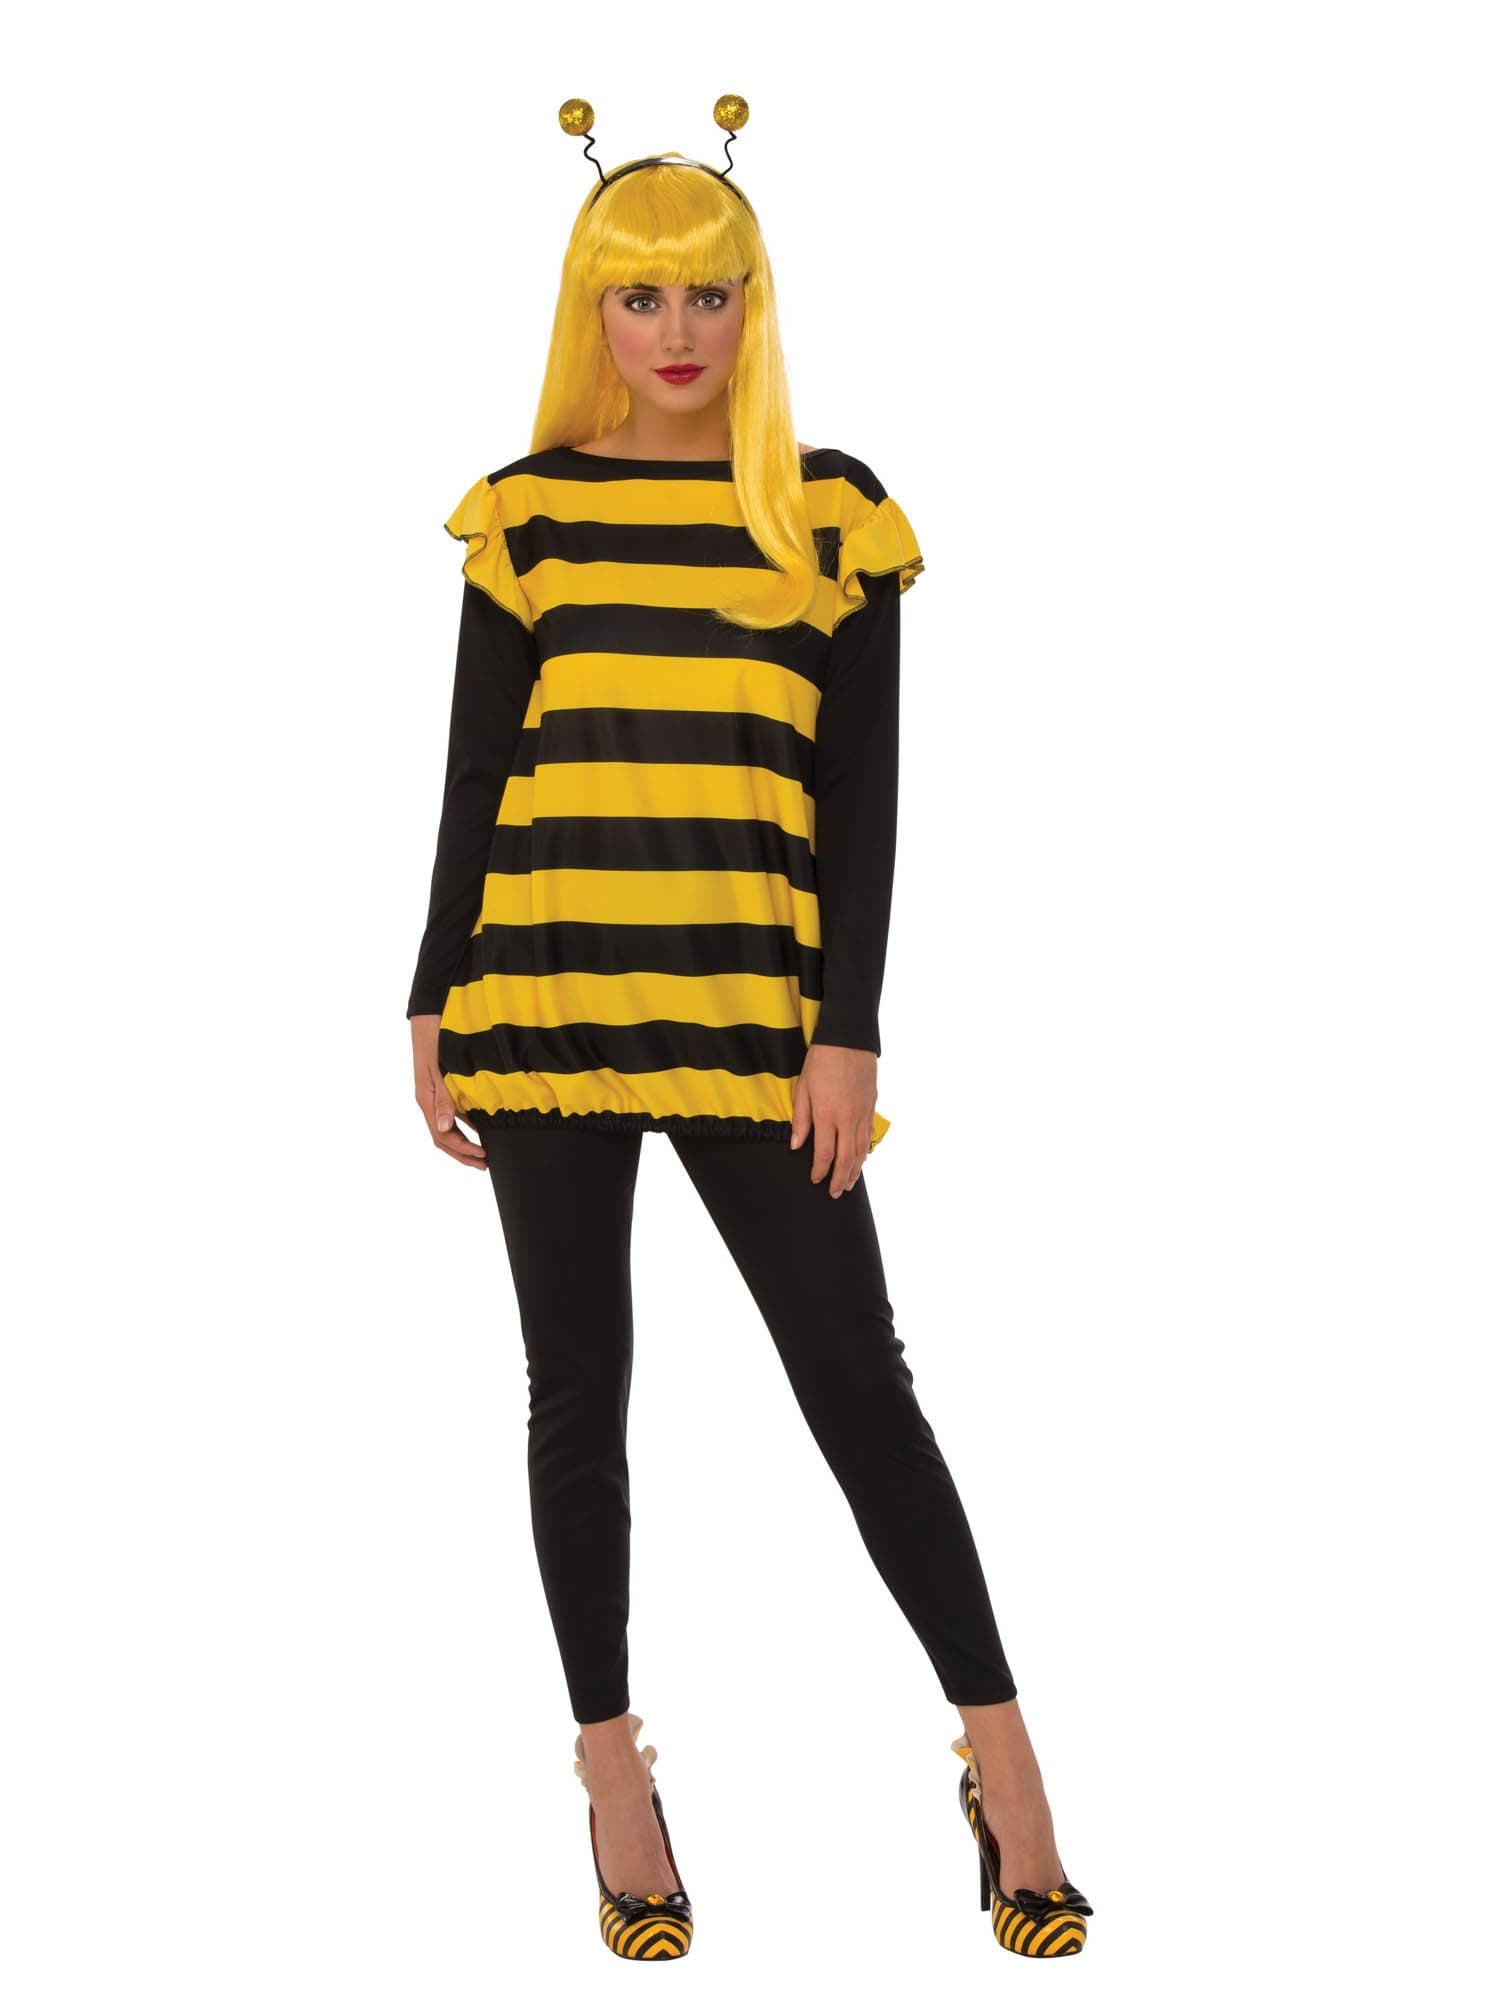 Adult Bumble Bee Costume - costumes.com